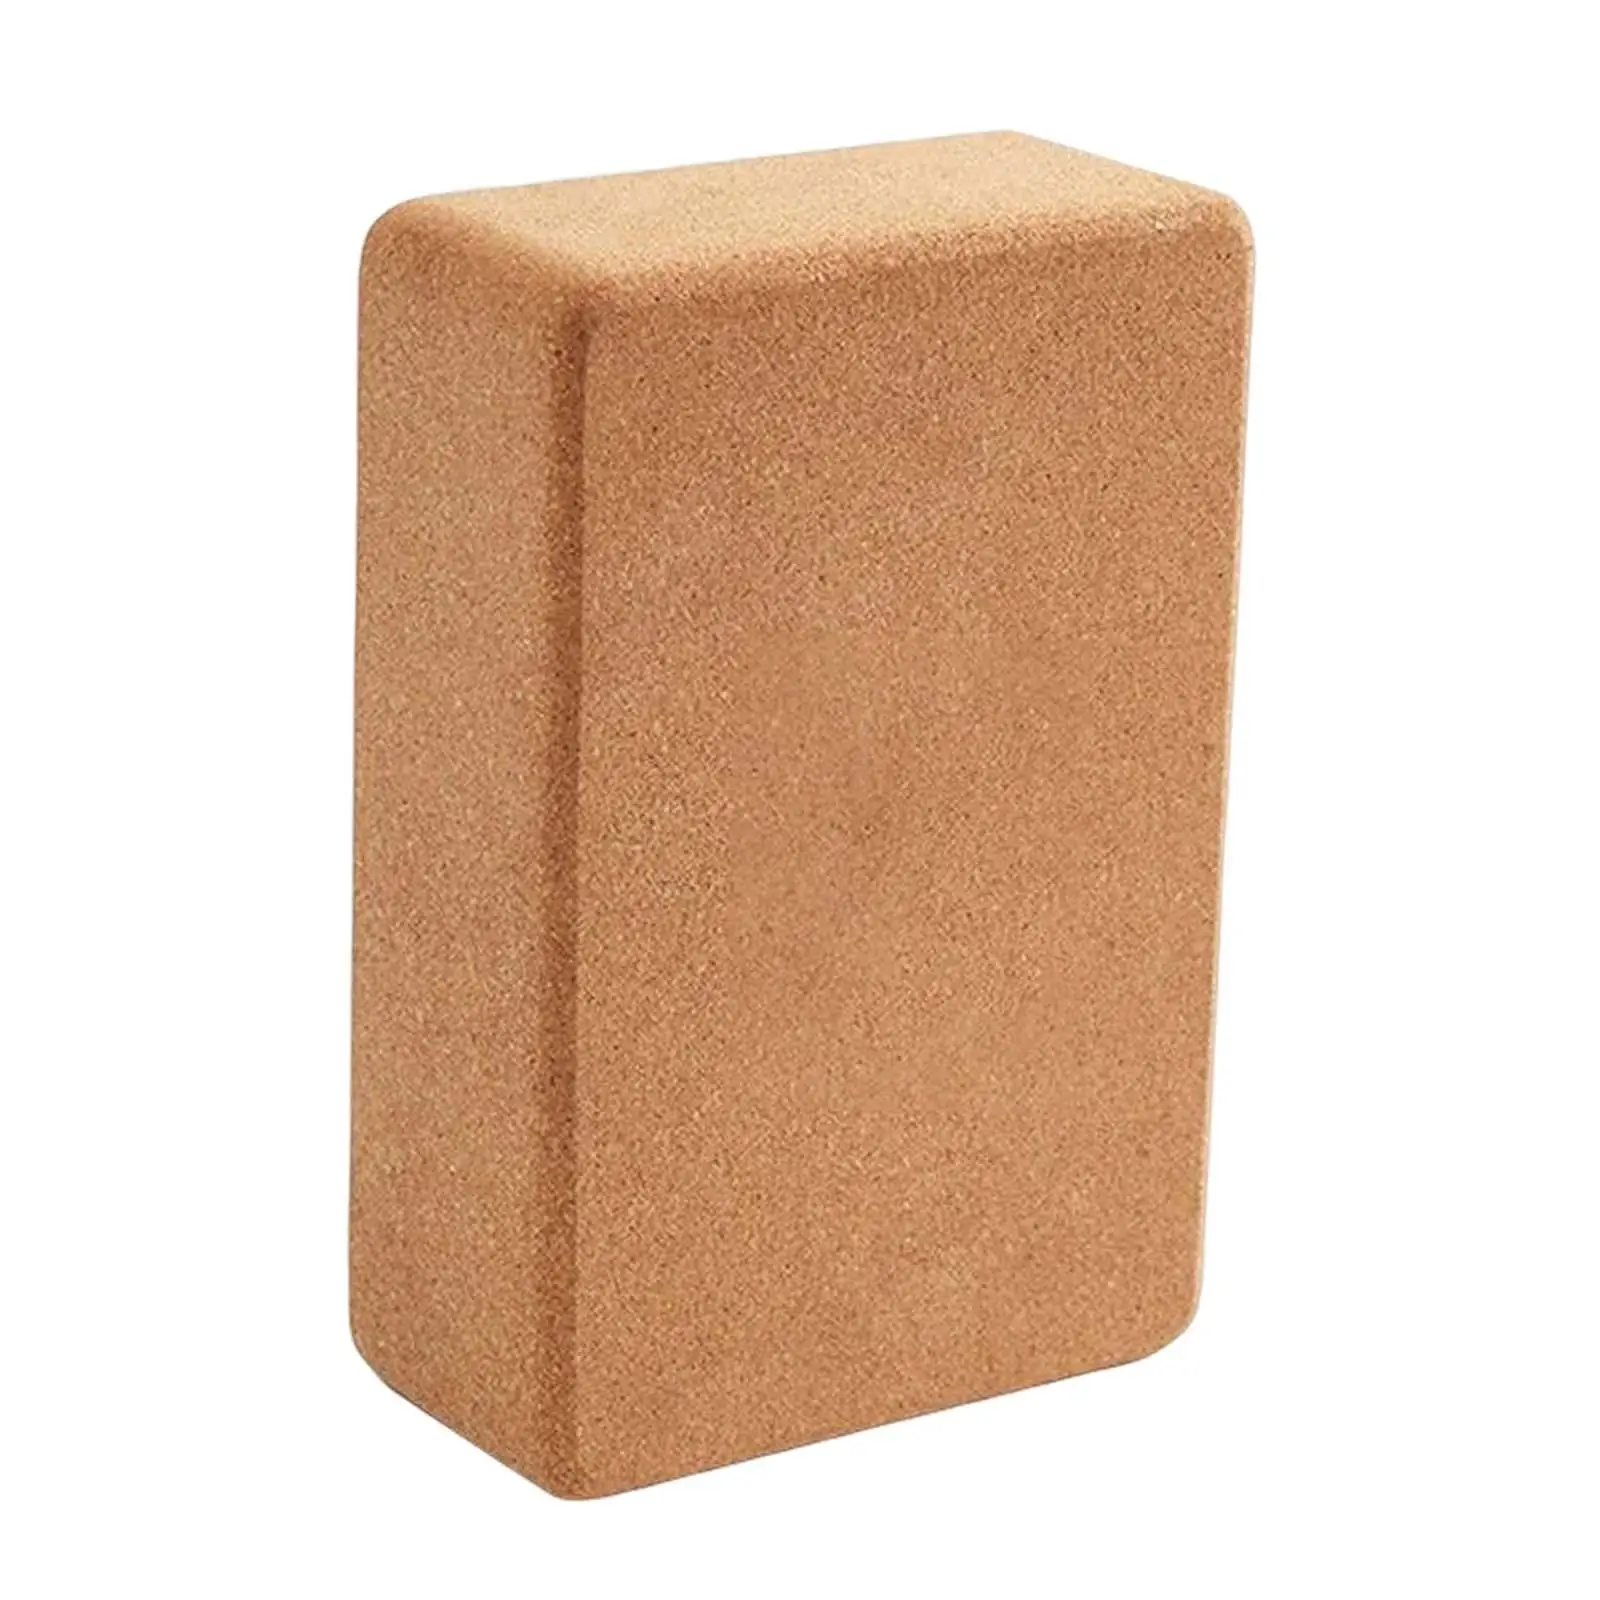 Cork Yoga Brick Squat Wedge Block Soft for Stretching Workout Indoor Sports